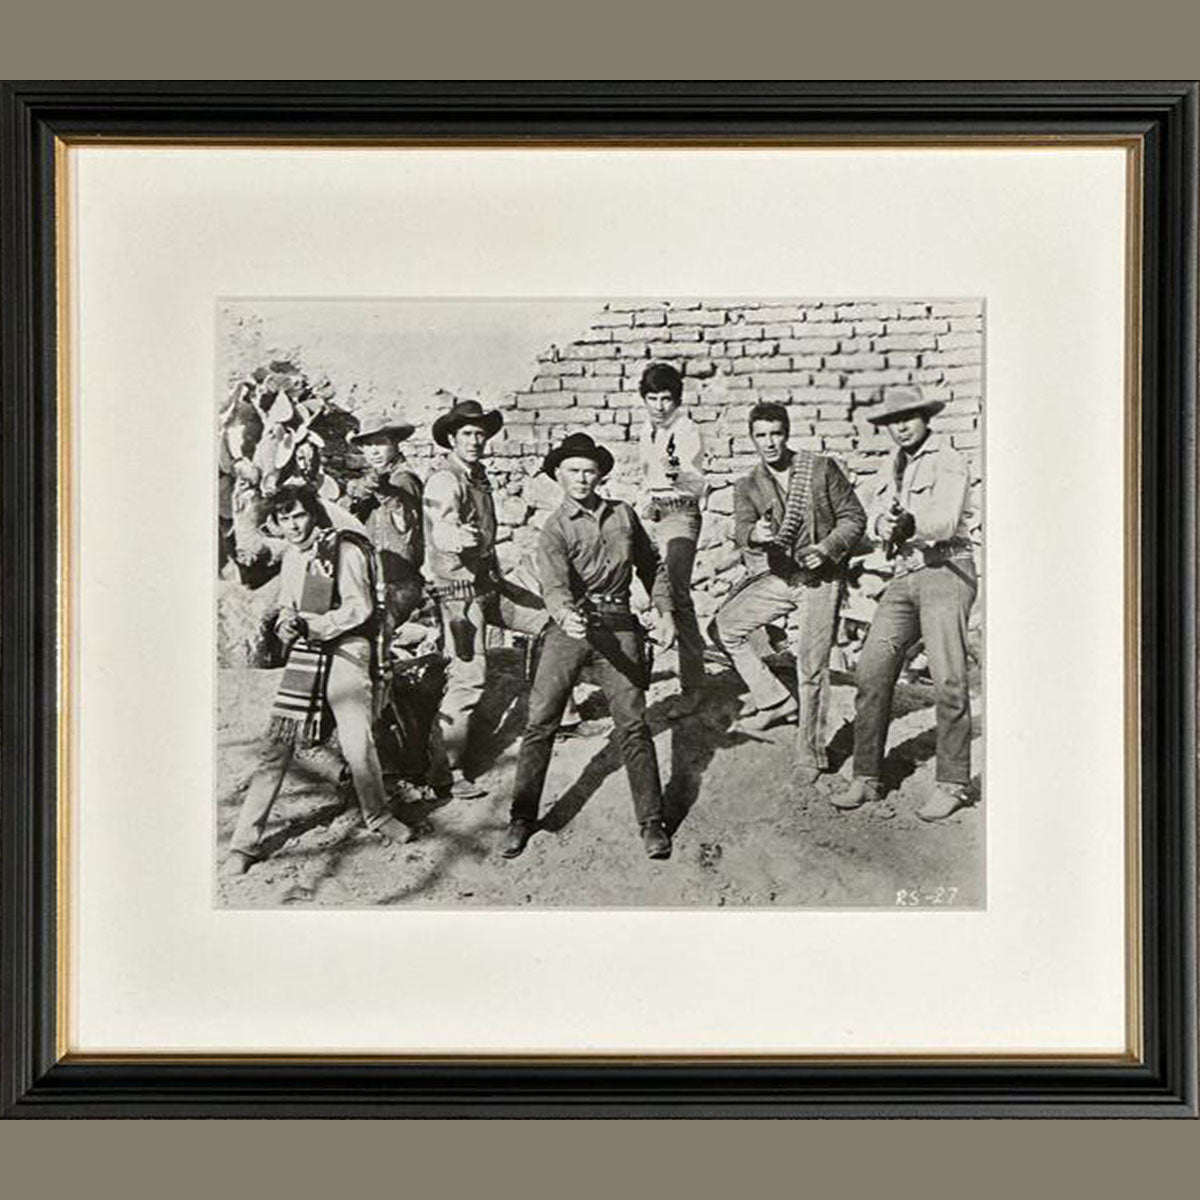 Magnificent Seven, The (1960) - FRAMED